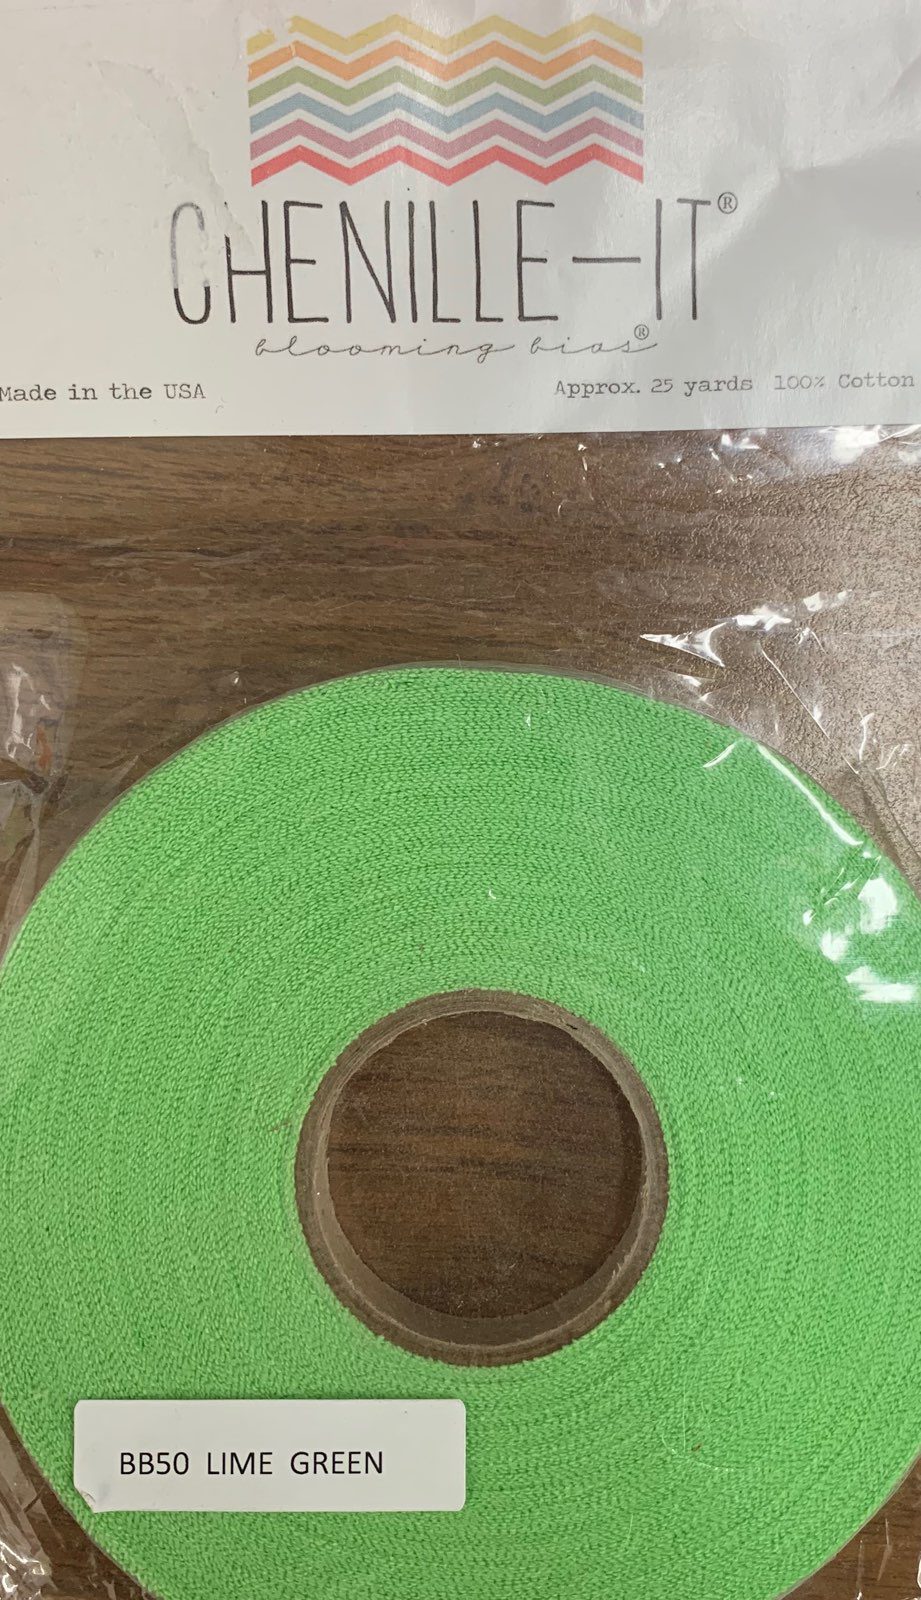 Chenille It - 3/8" x 25 yrds - Lime